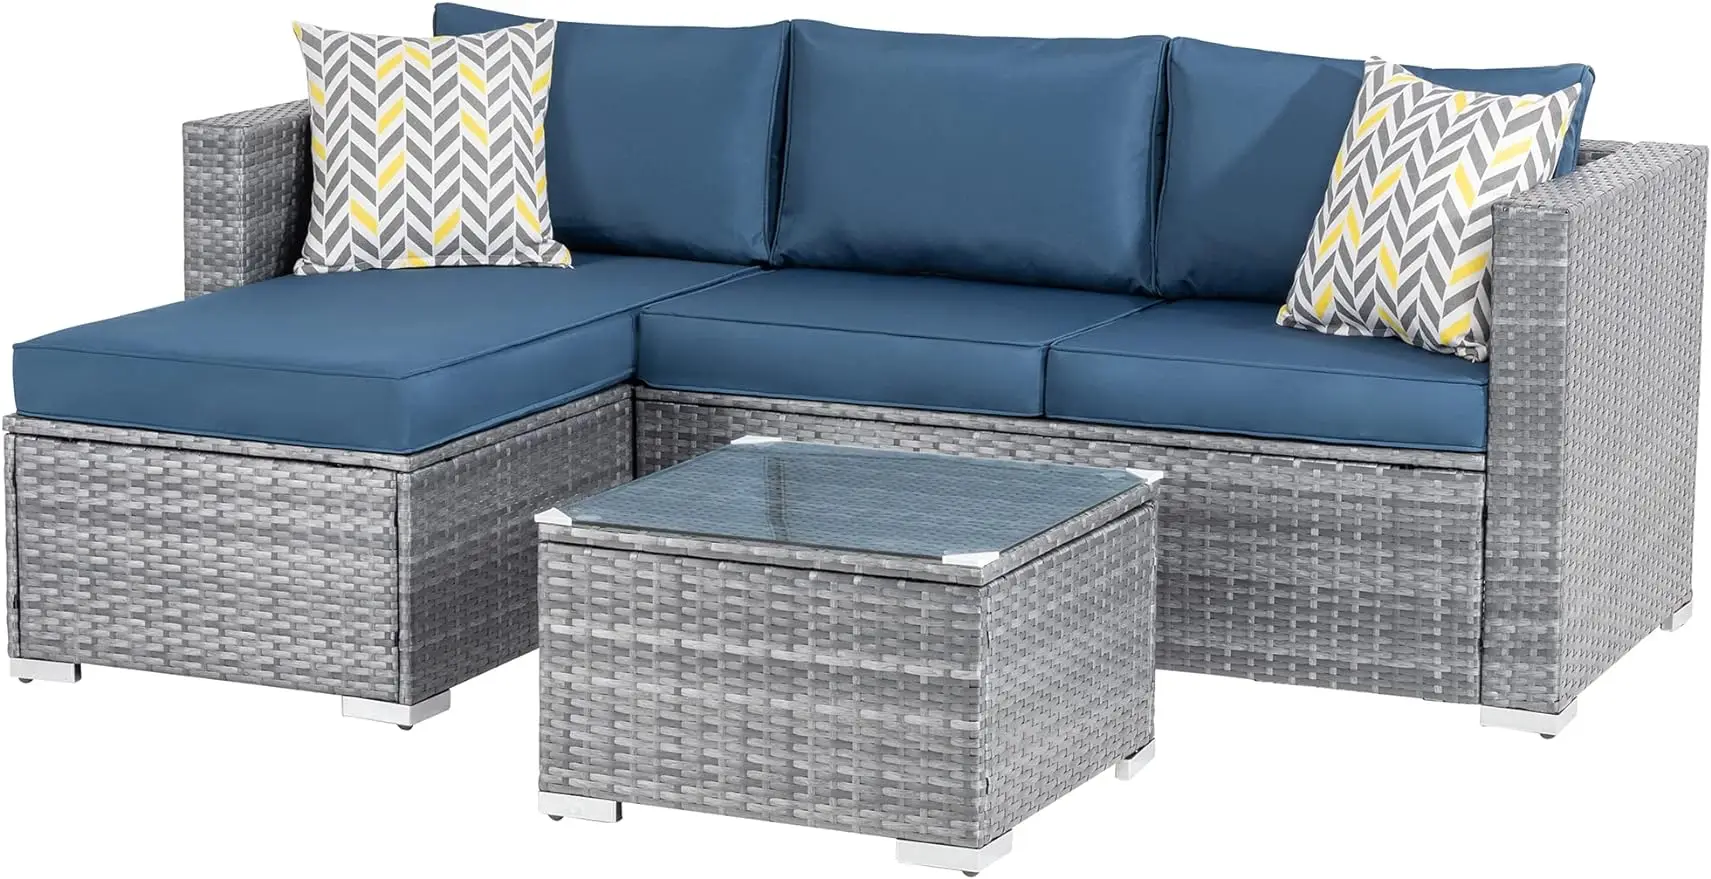 

Shintenchi Patio Furniture Sets 3 Pieces Outdoor Sectional Sofa Silver All-Weather Rattan Wicker Sofa Small Patio Conversation